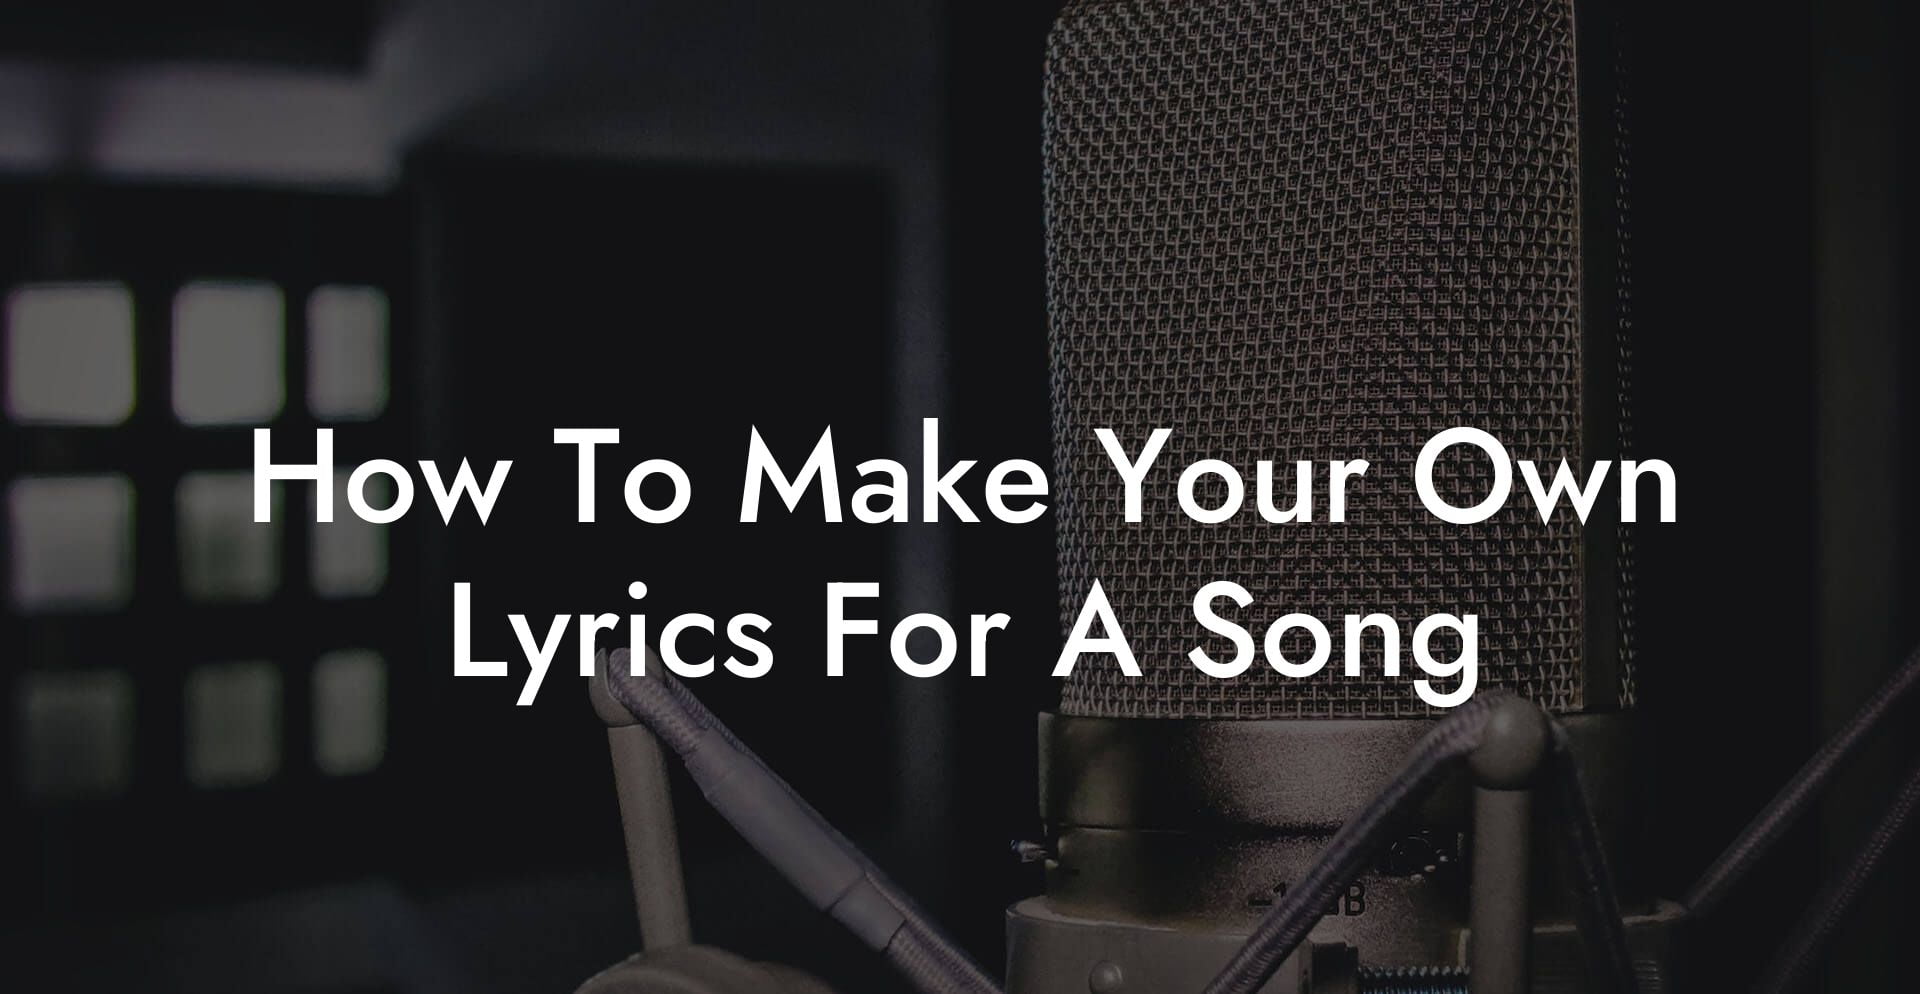 how to make your own lyrics for a song lyric assistant